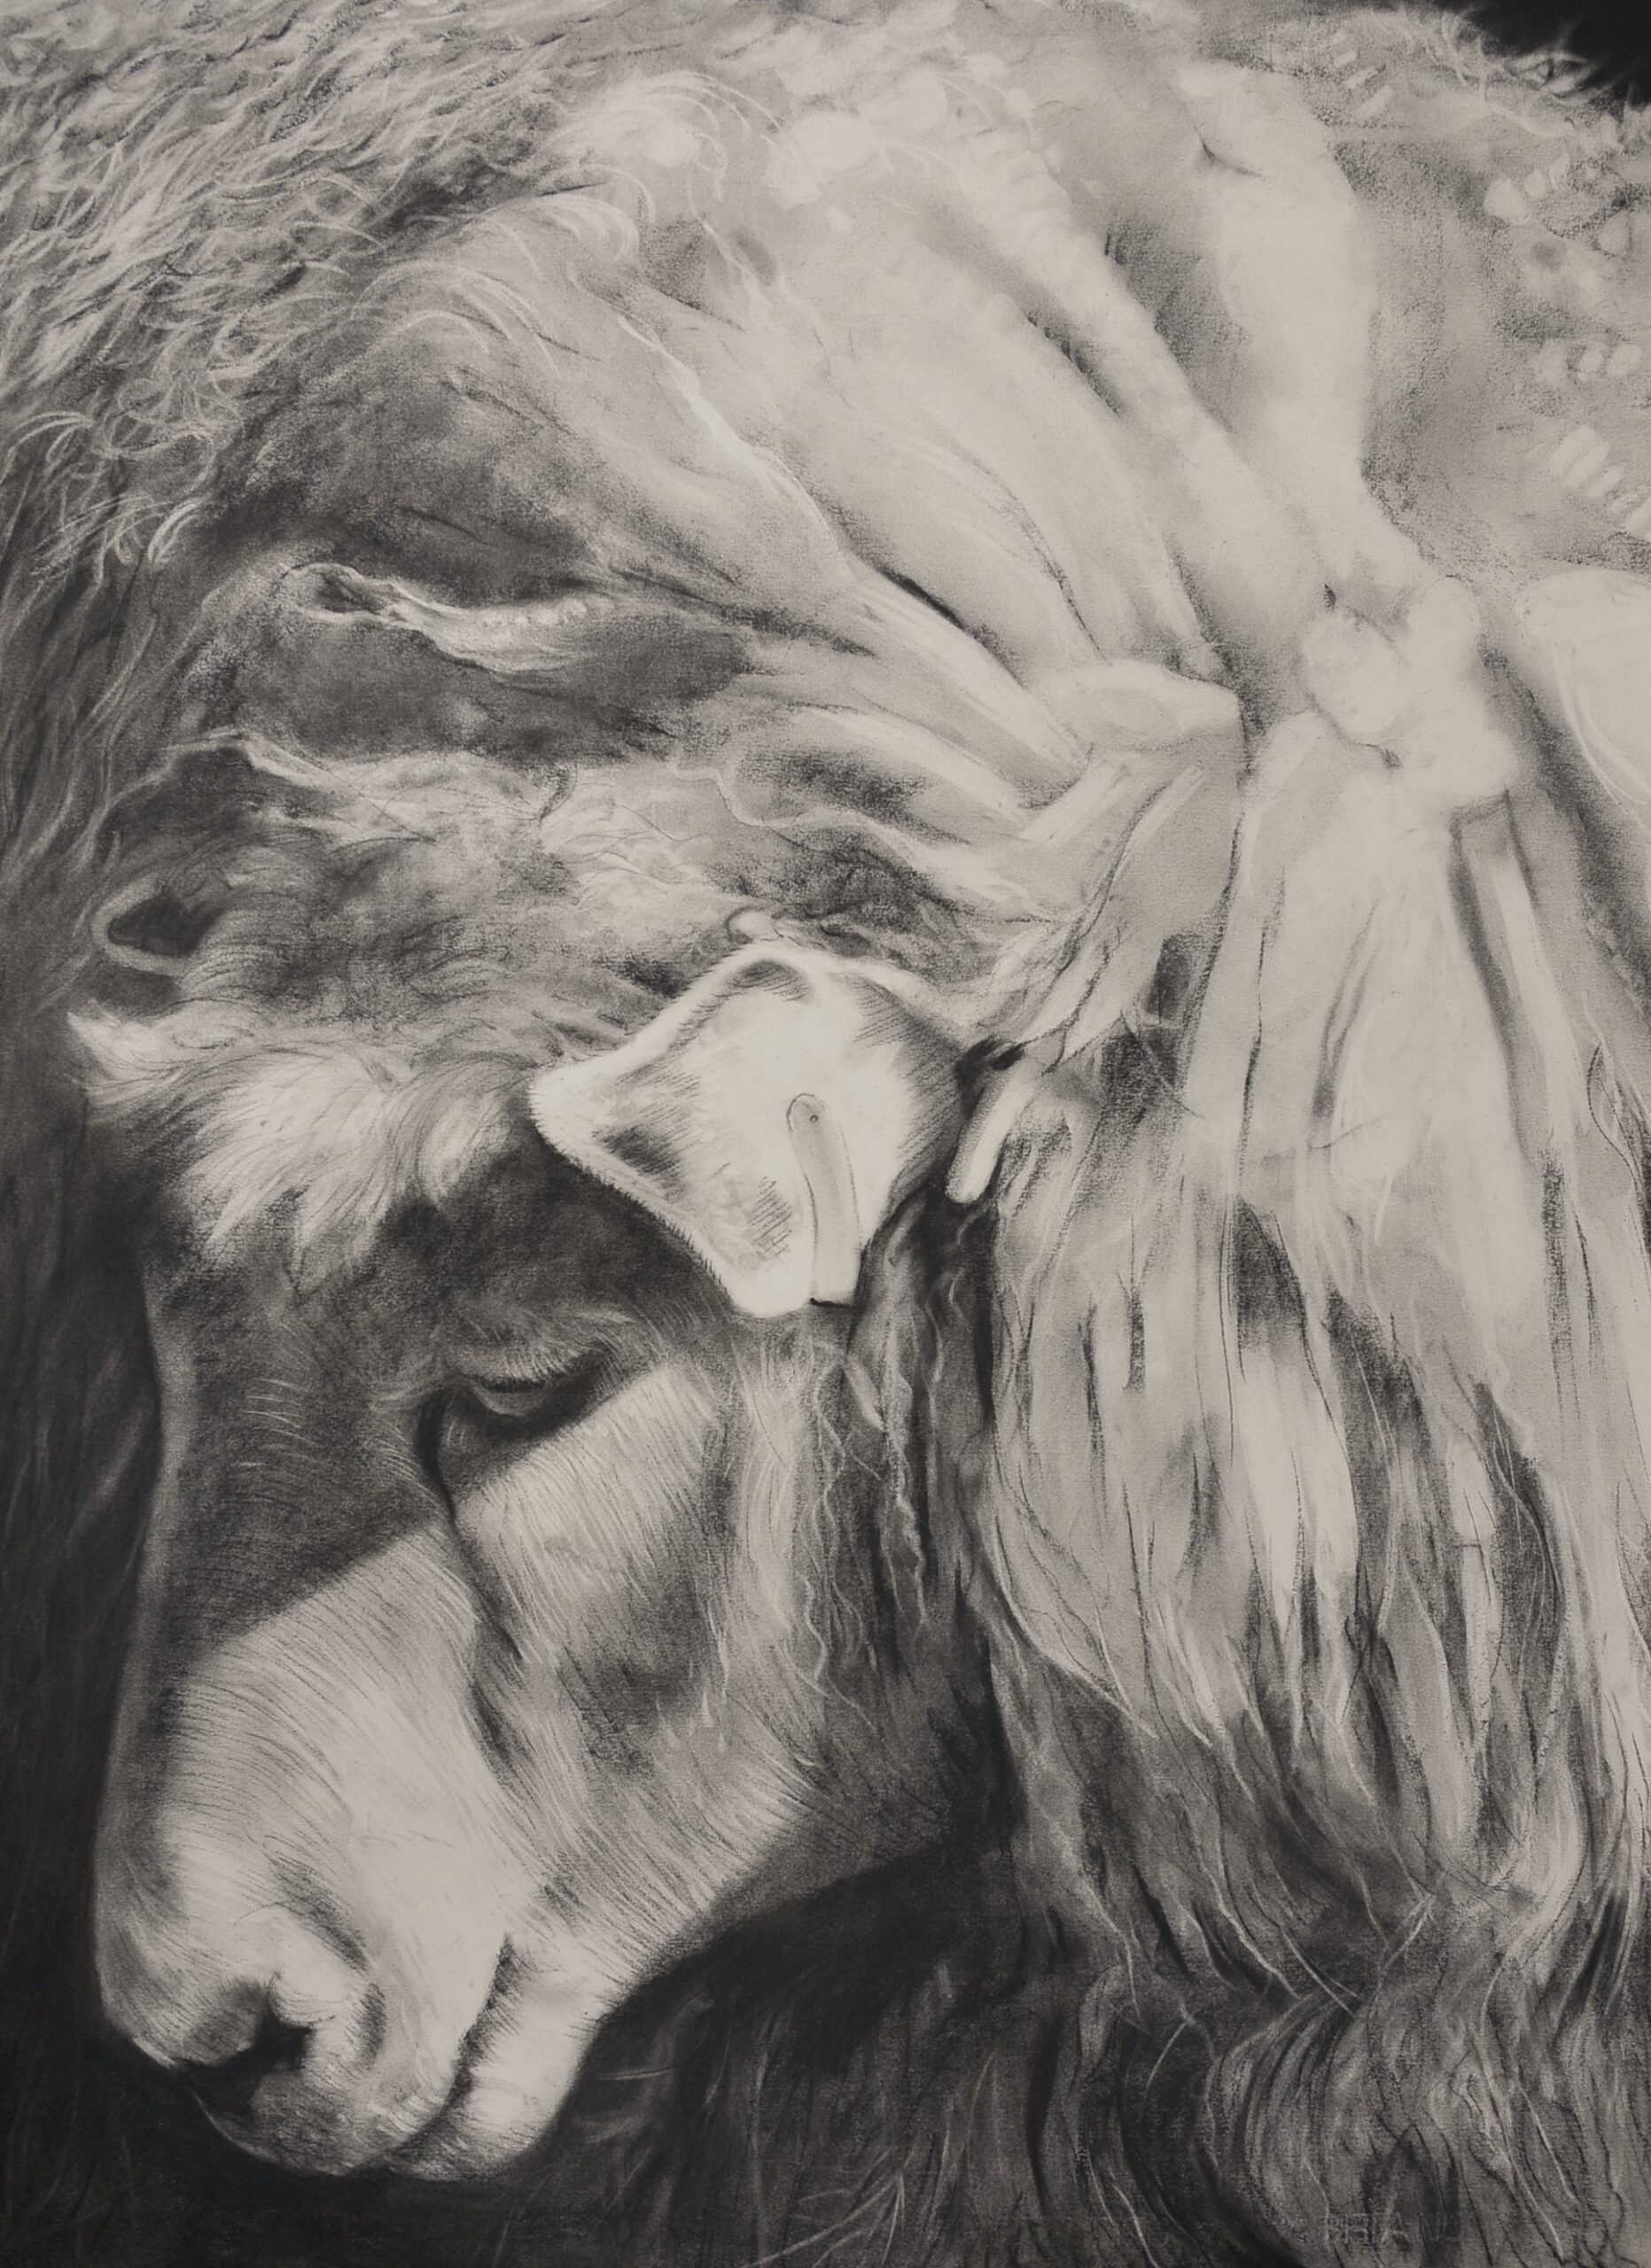 Charcoal drawing of a sheep head down